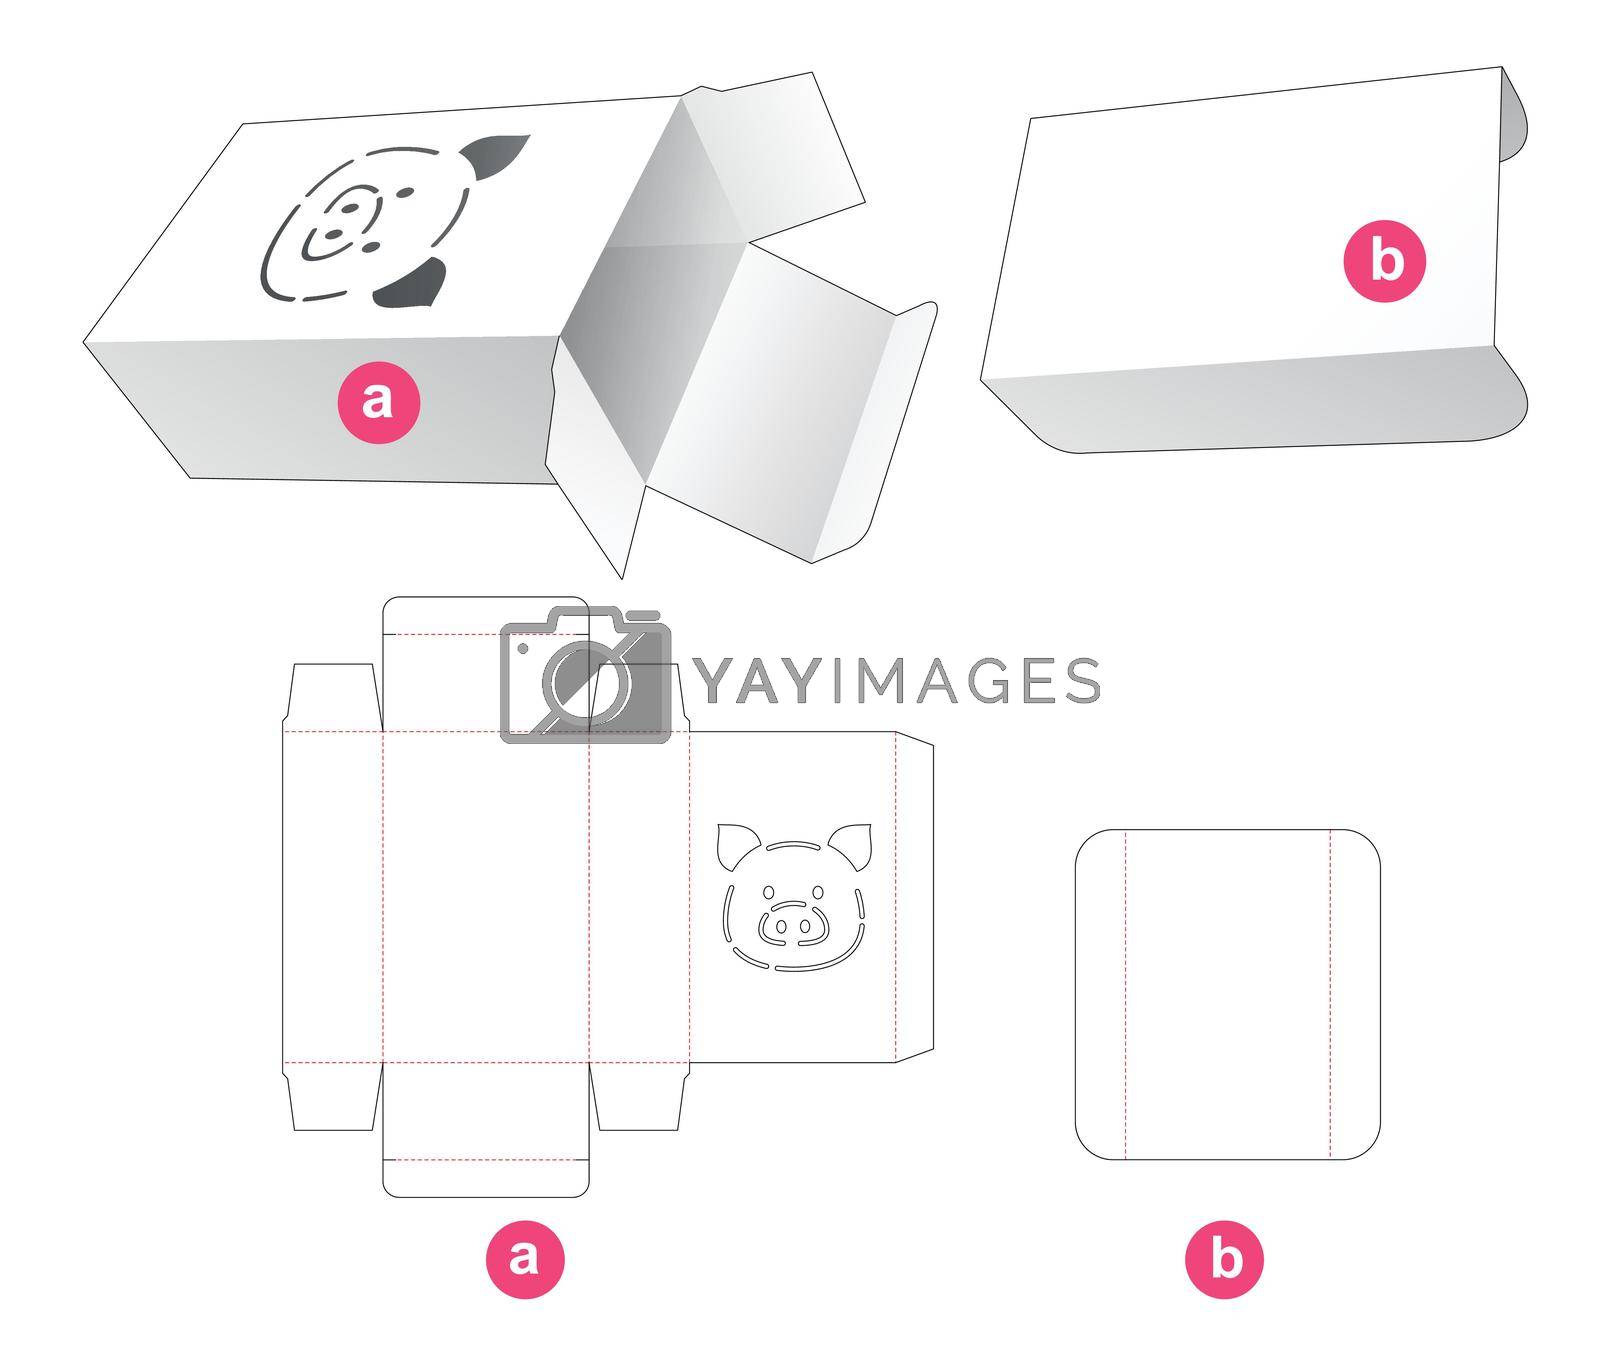 Royalty free image of Packaging box with pig cartoon stencil and insert partition die cut template by valueinvestor